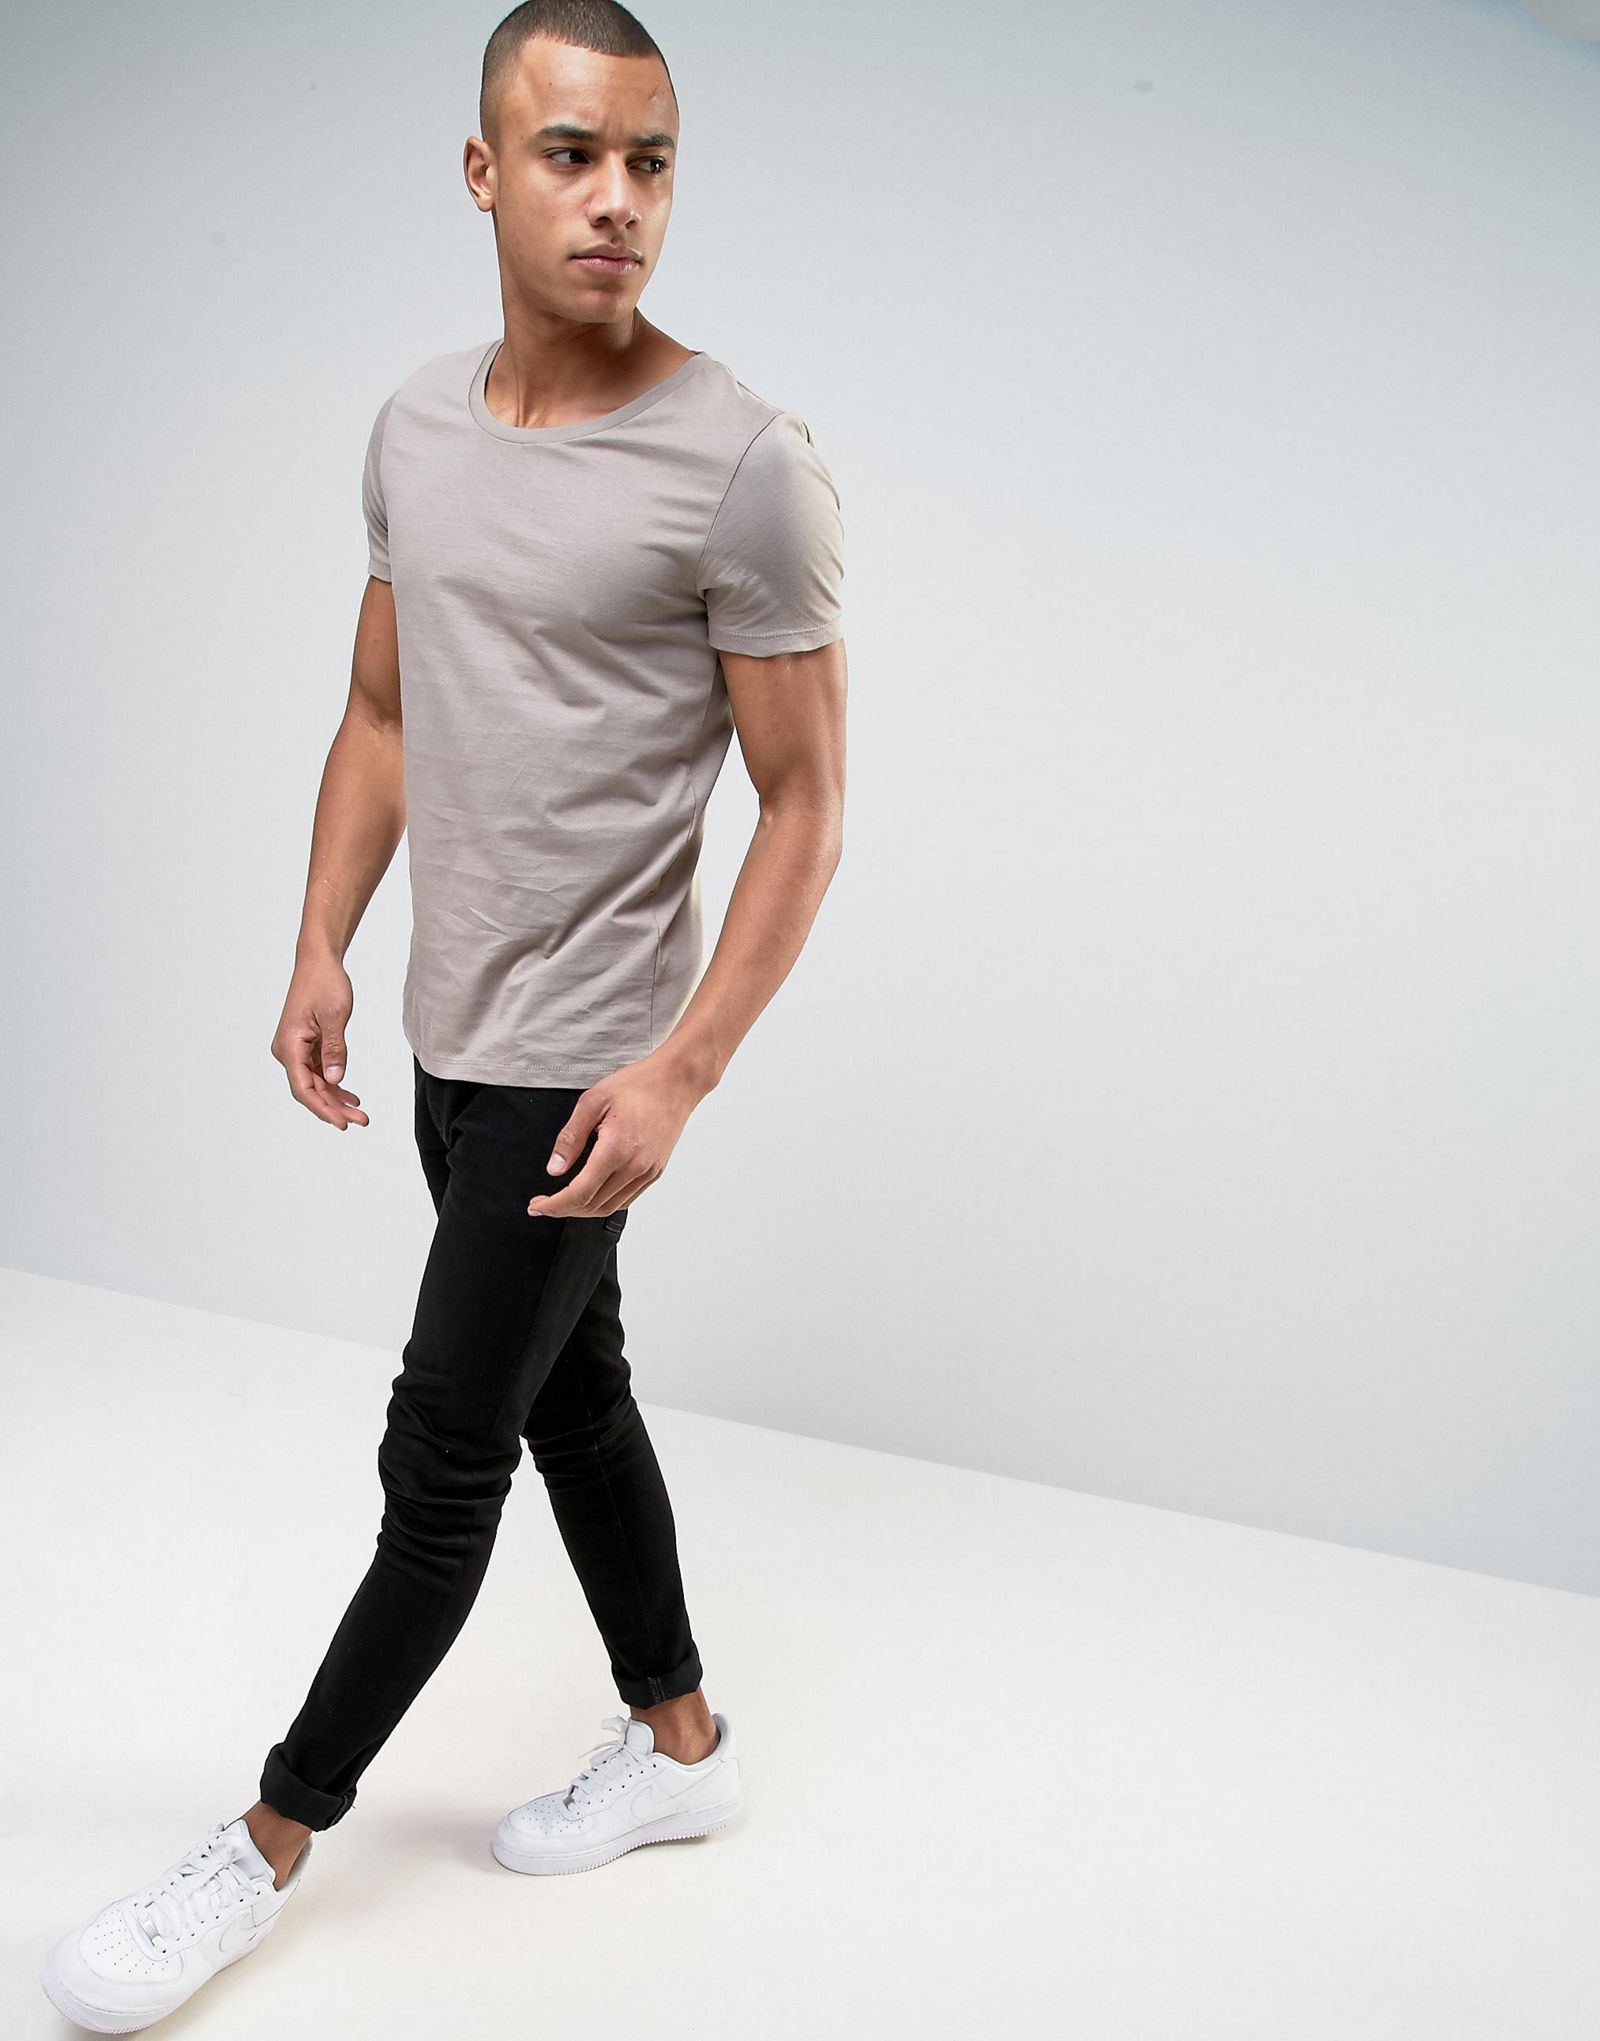 ASOS 5 Pack T-Shirt With Scoop Neck SAVE 17%